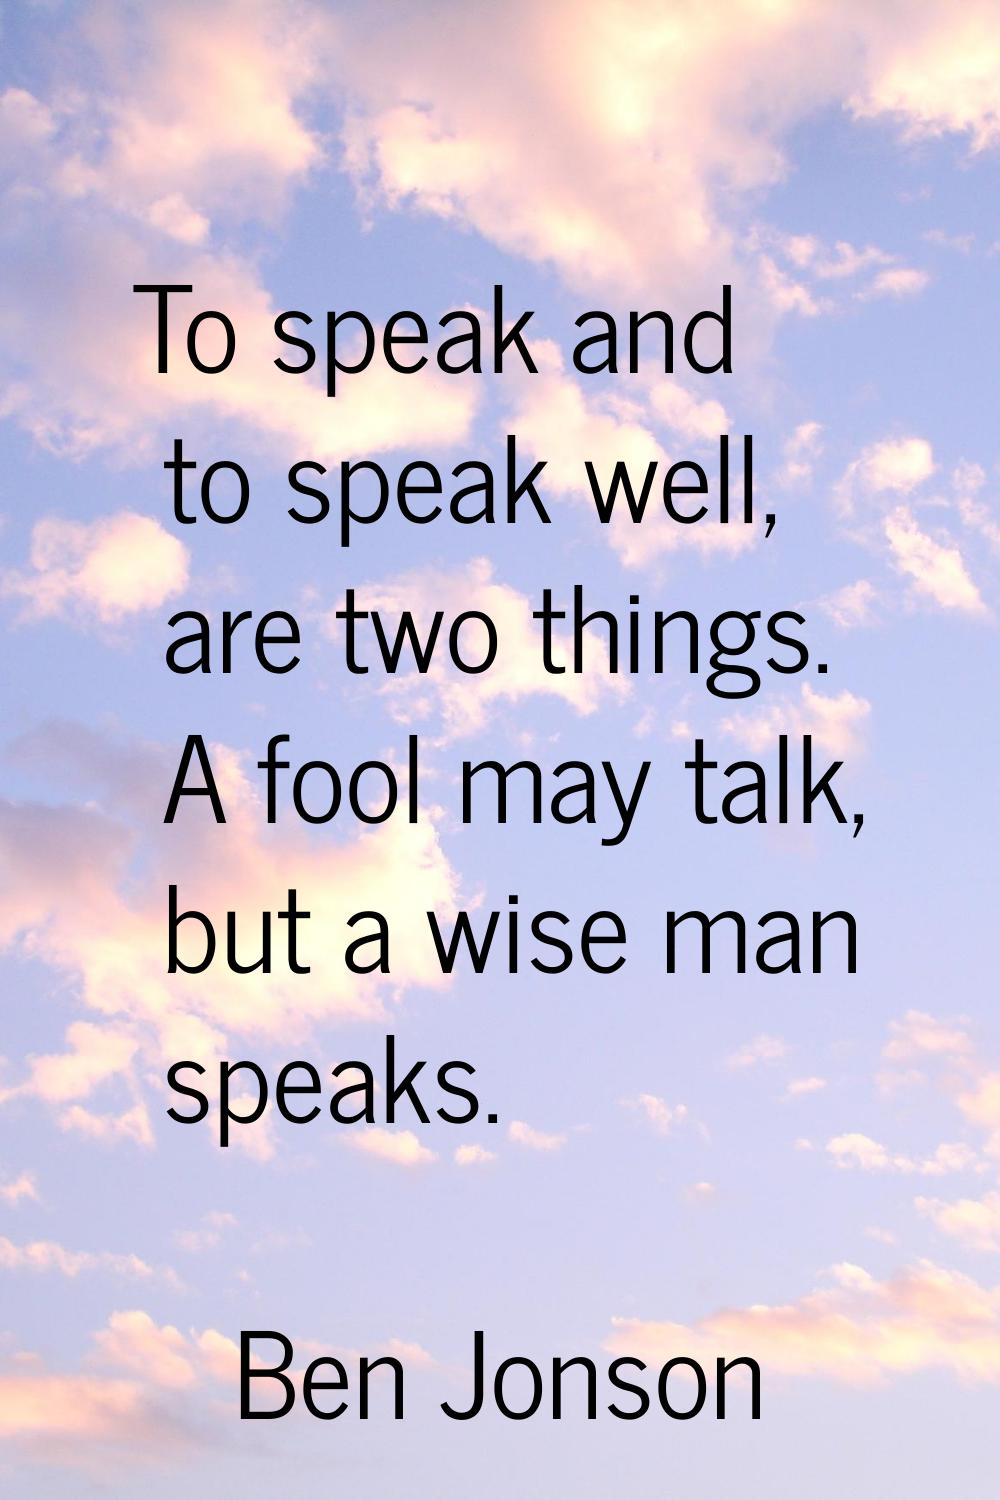 To speak and to speak well, are two things. A fool may talk, but a wise man speaks.